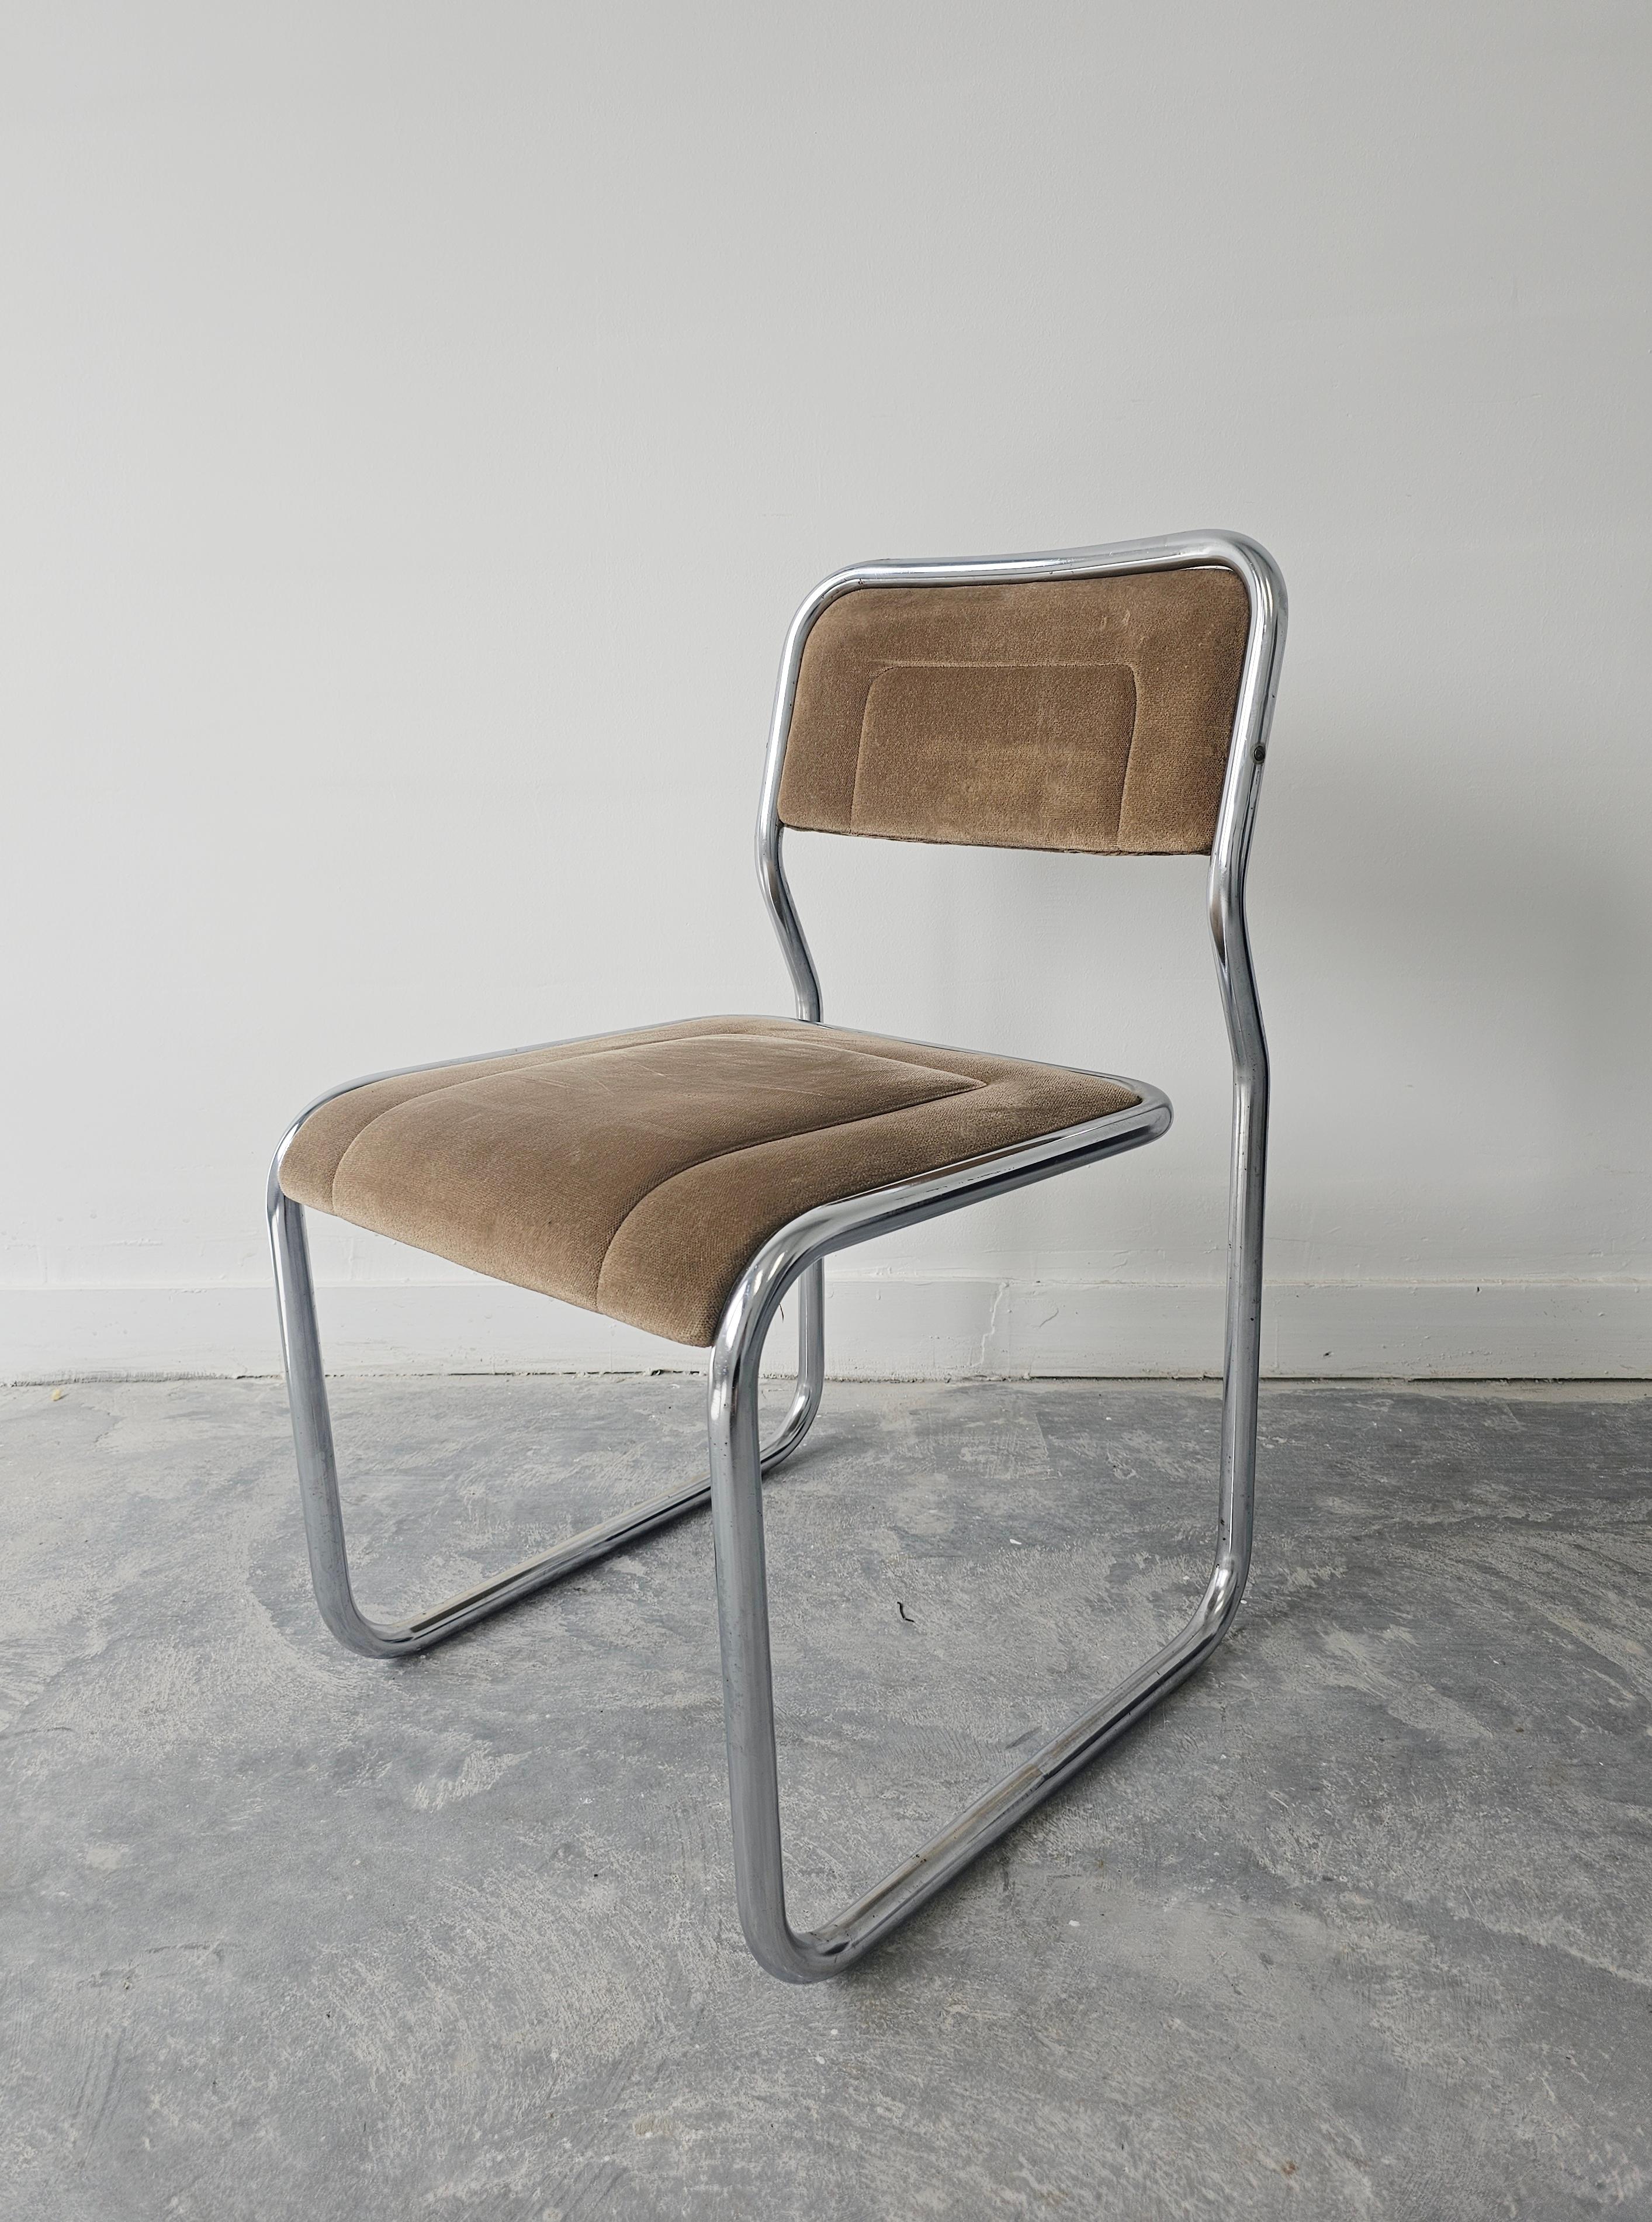 Bauhaus Cantilever Dining Chair with Infinity Frame, Italy 1970s For Sale 1